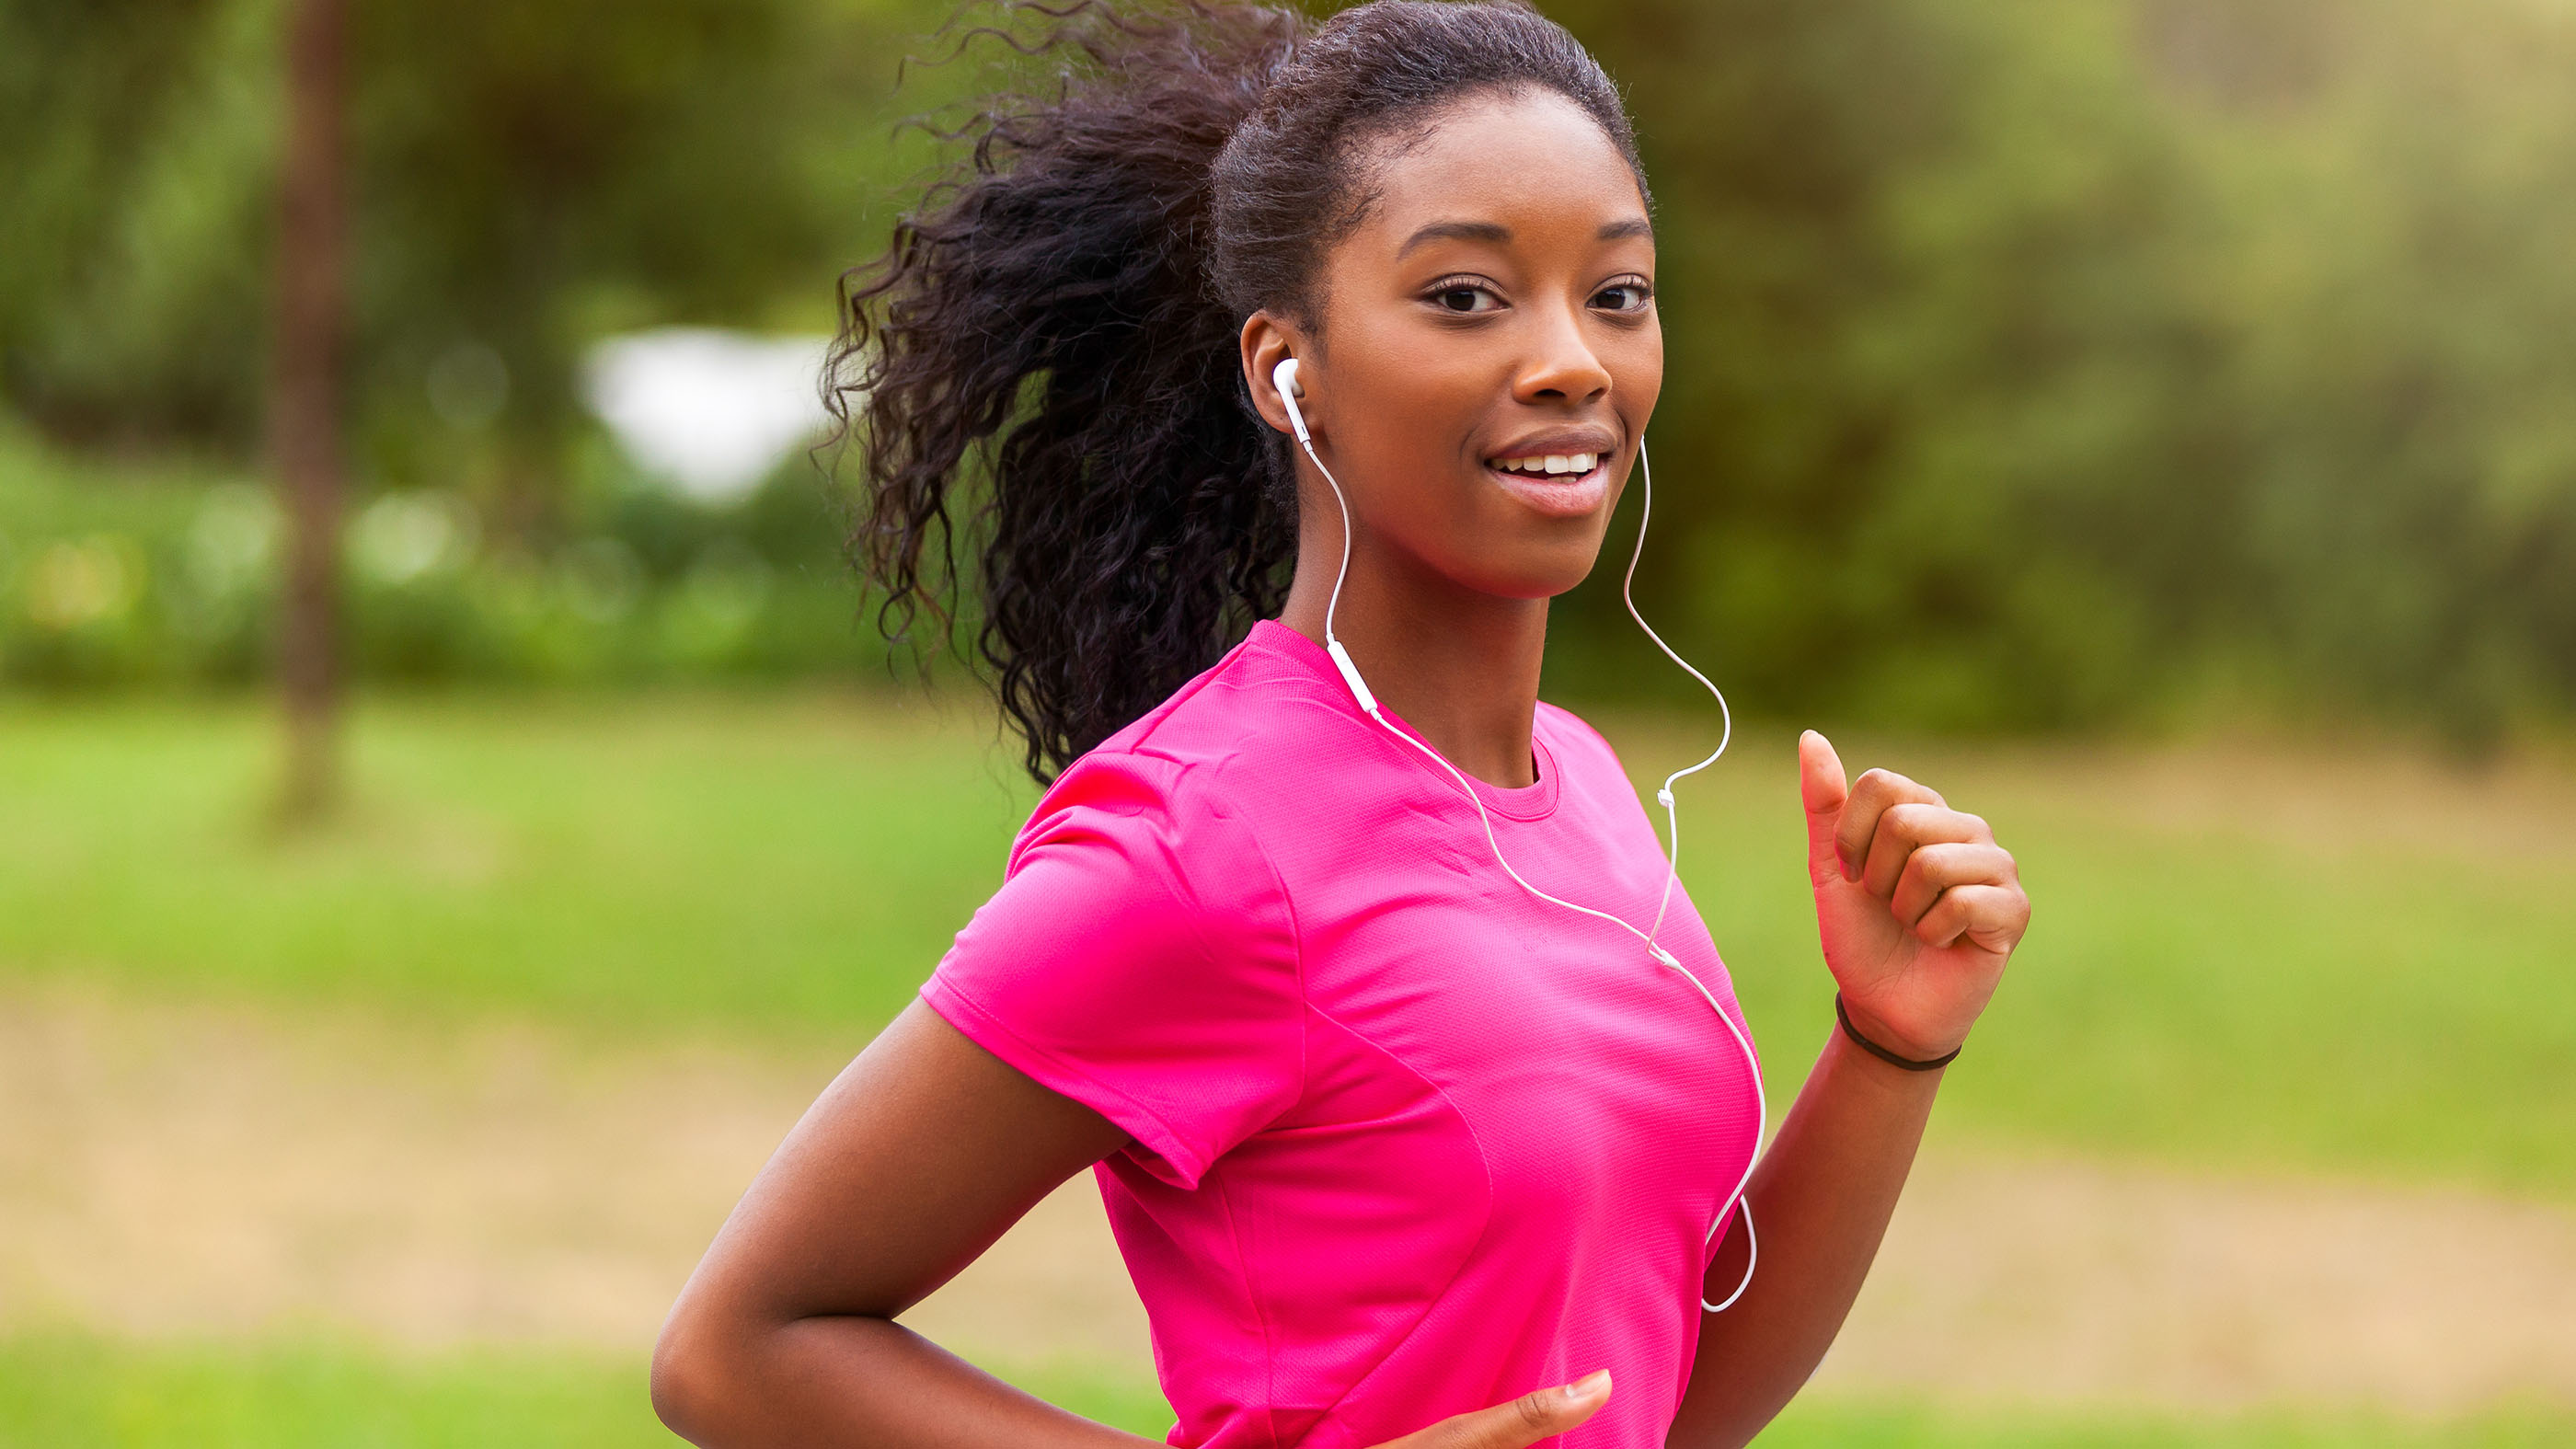 A close-up of a woman running while wearing earbuds.